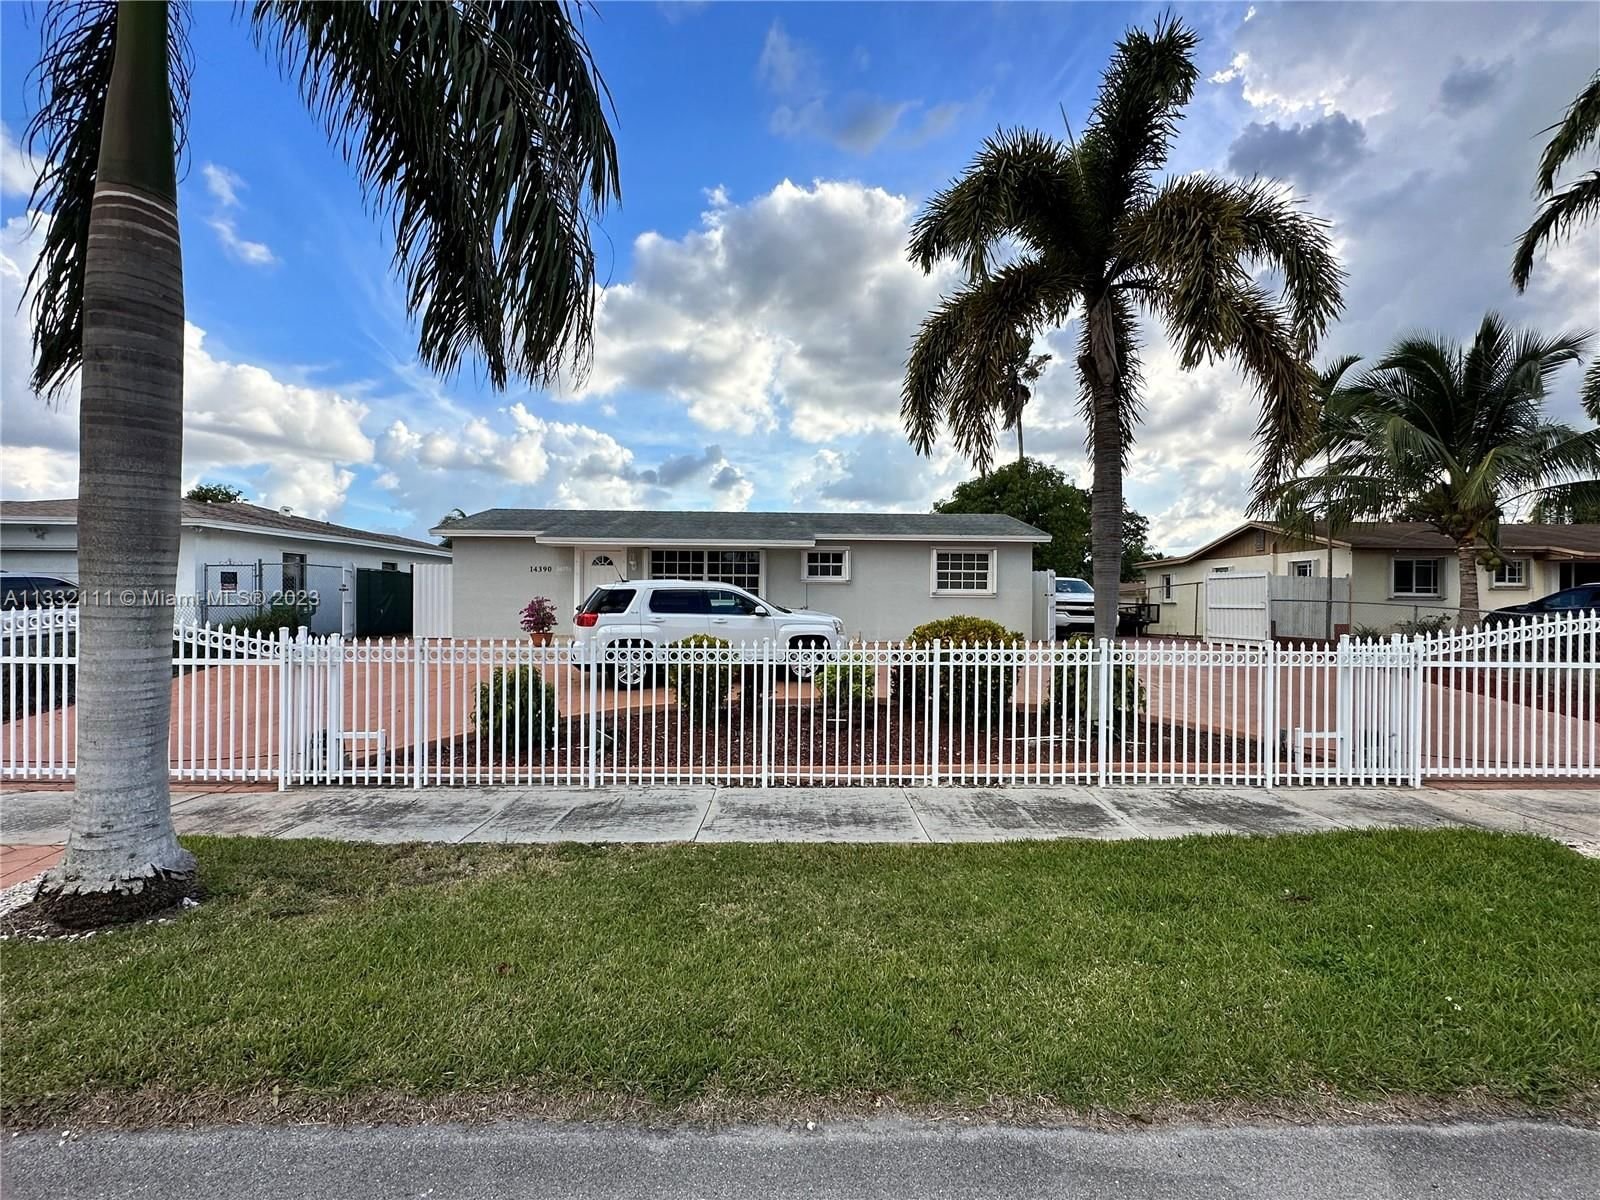 Real estate property located at 14390 297th St, Miami-Dade County, Homestead, FL